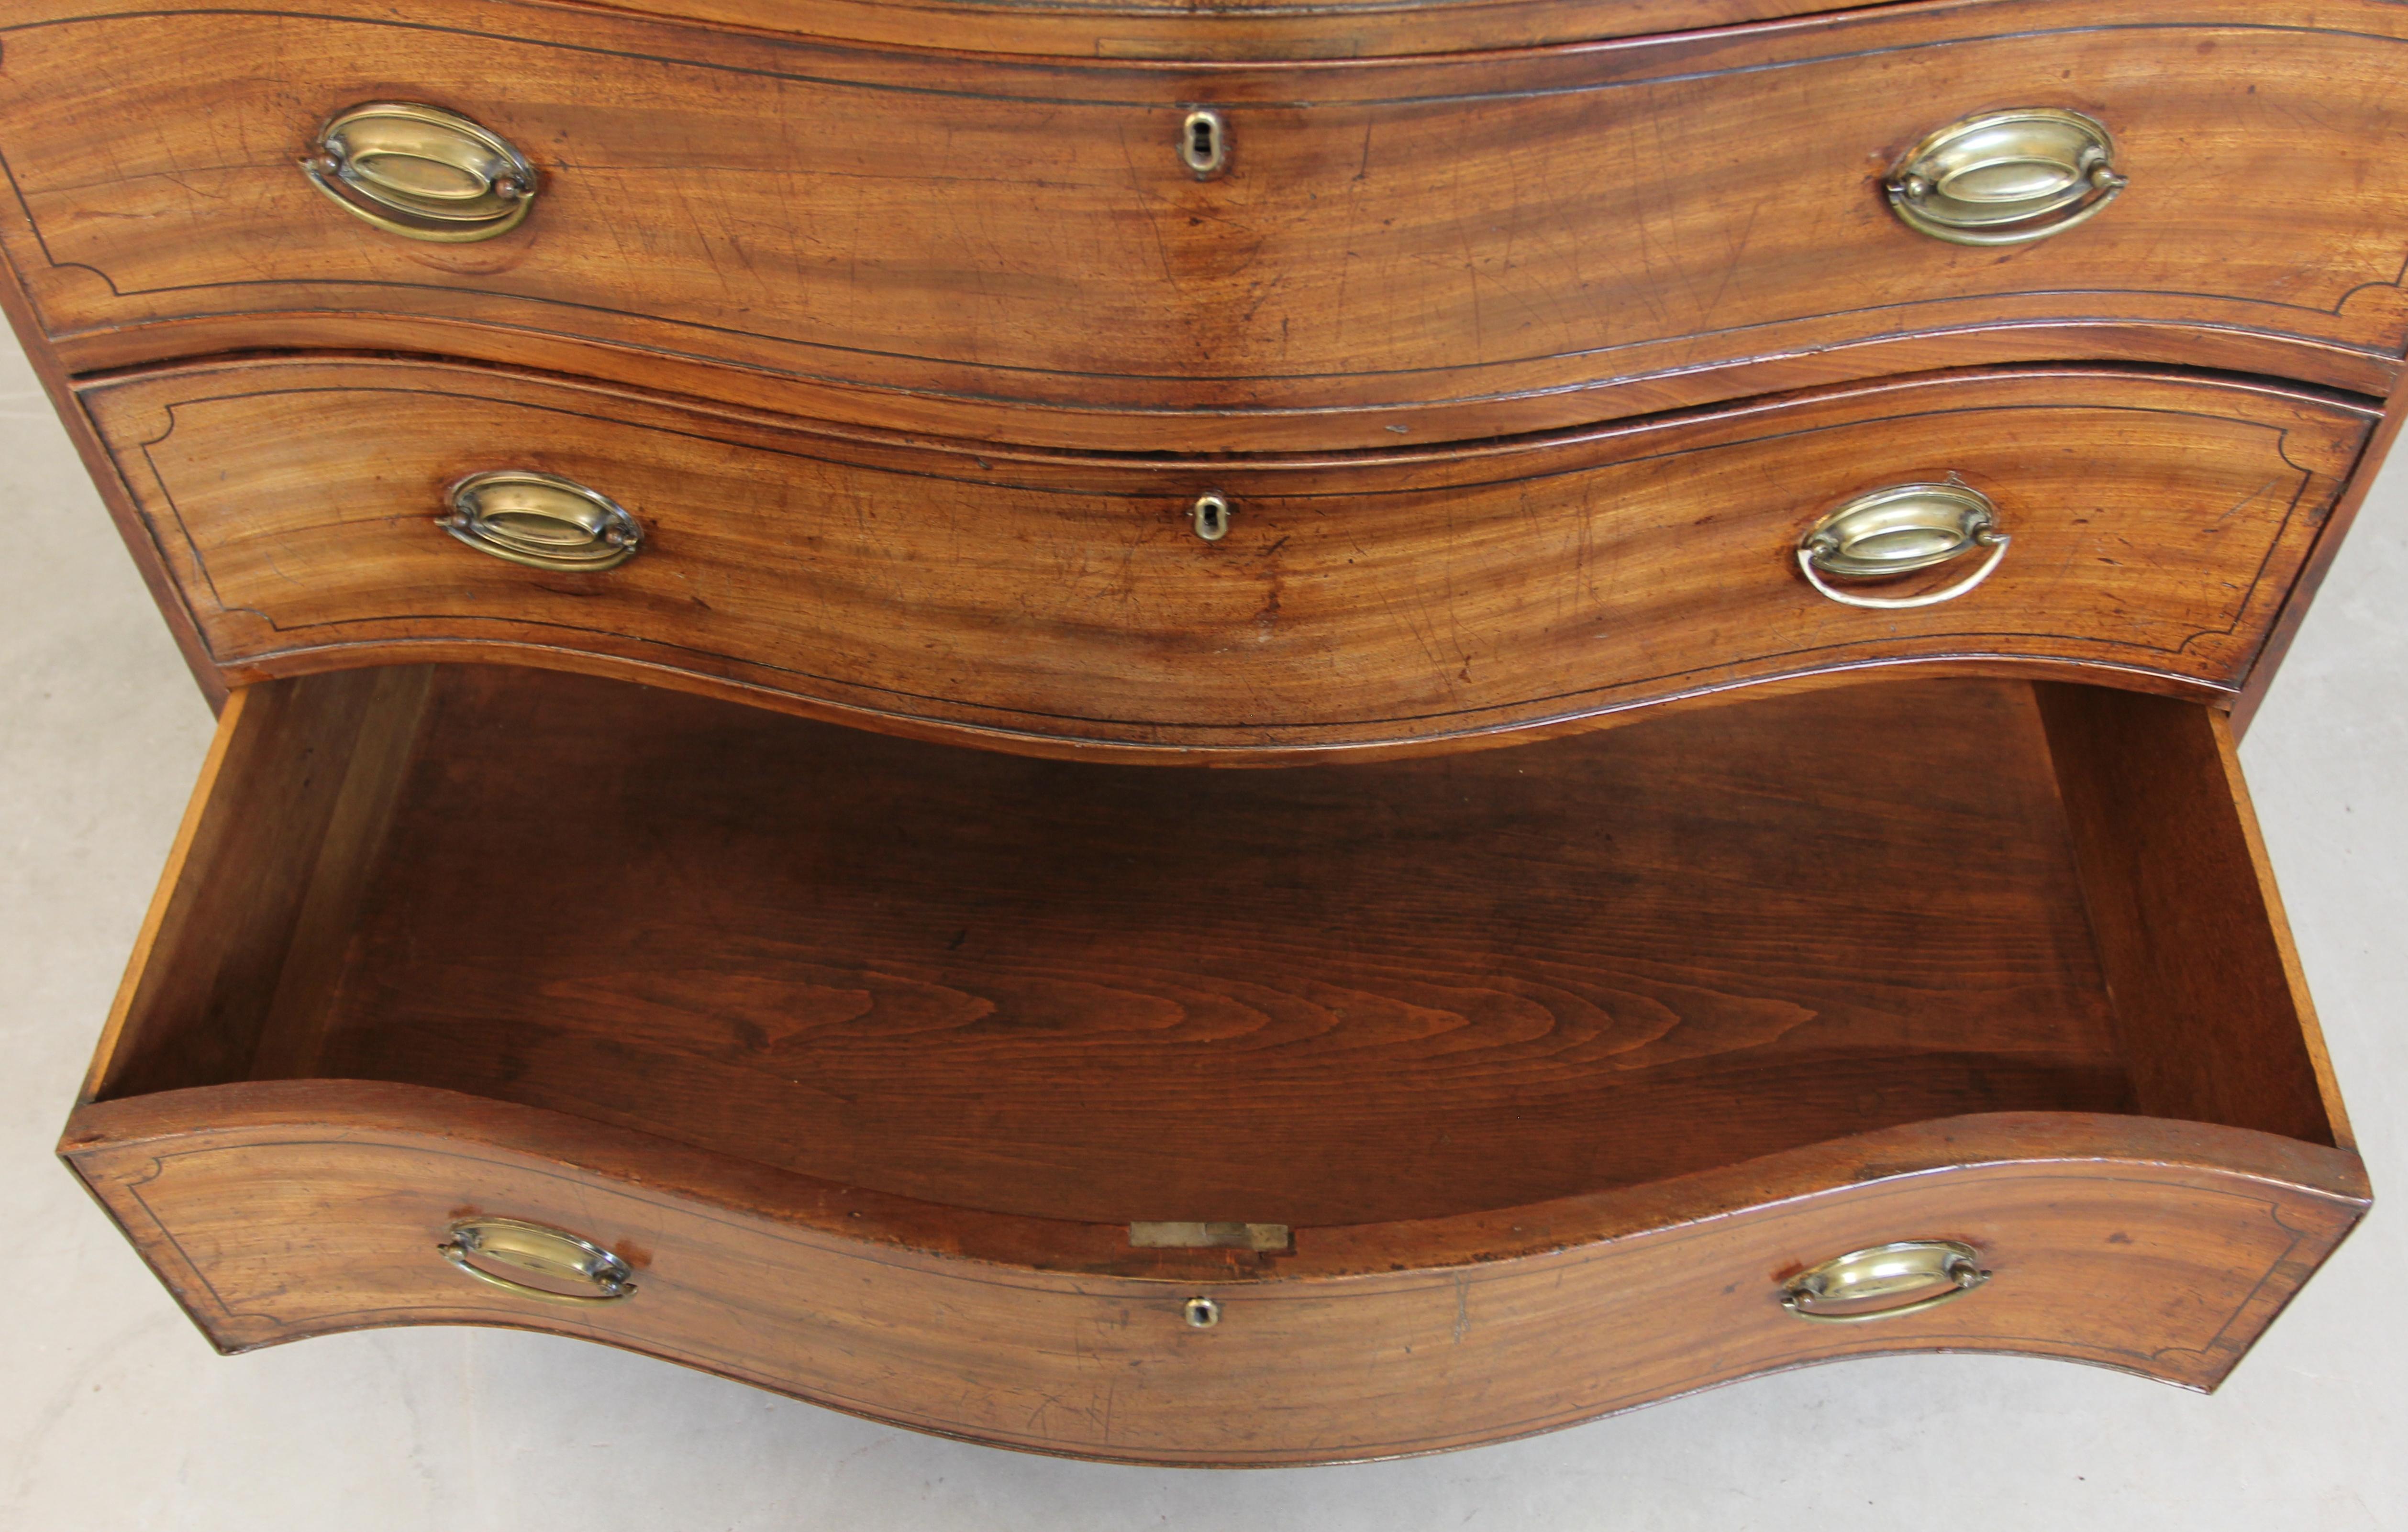 George III Mahogany Serpentine Chest of Drawers For Sale 2